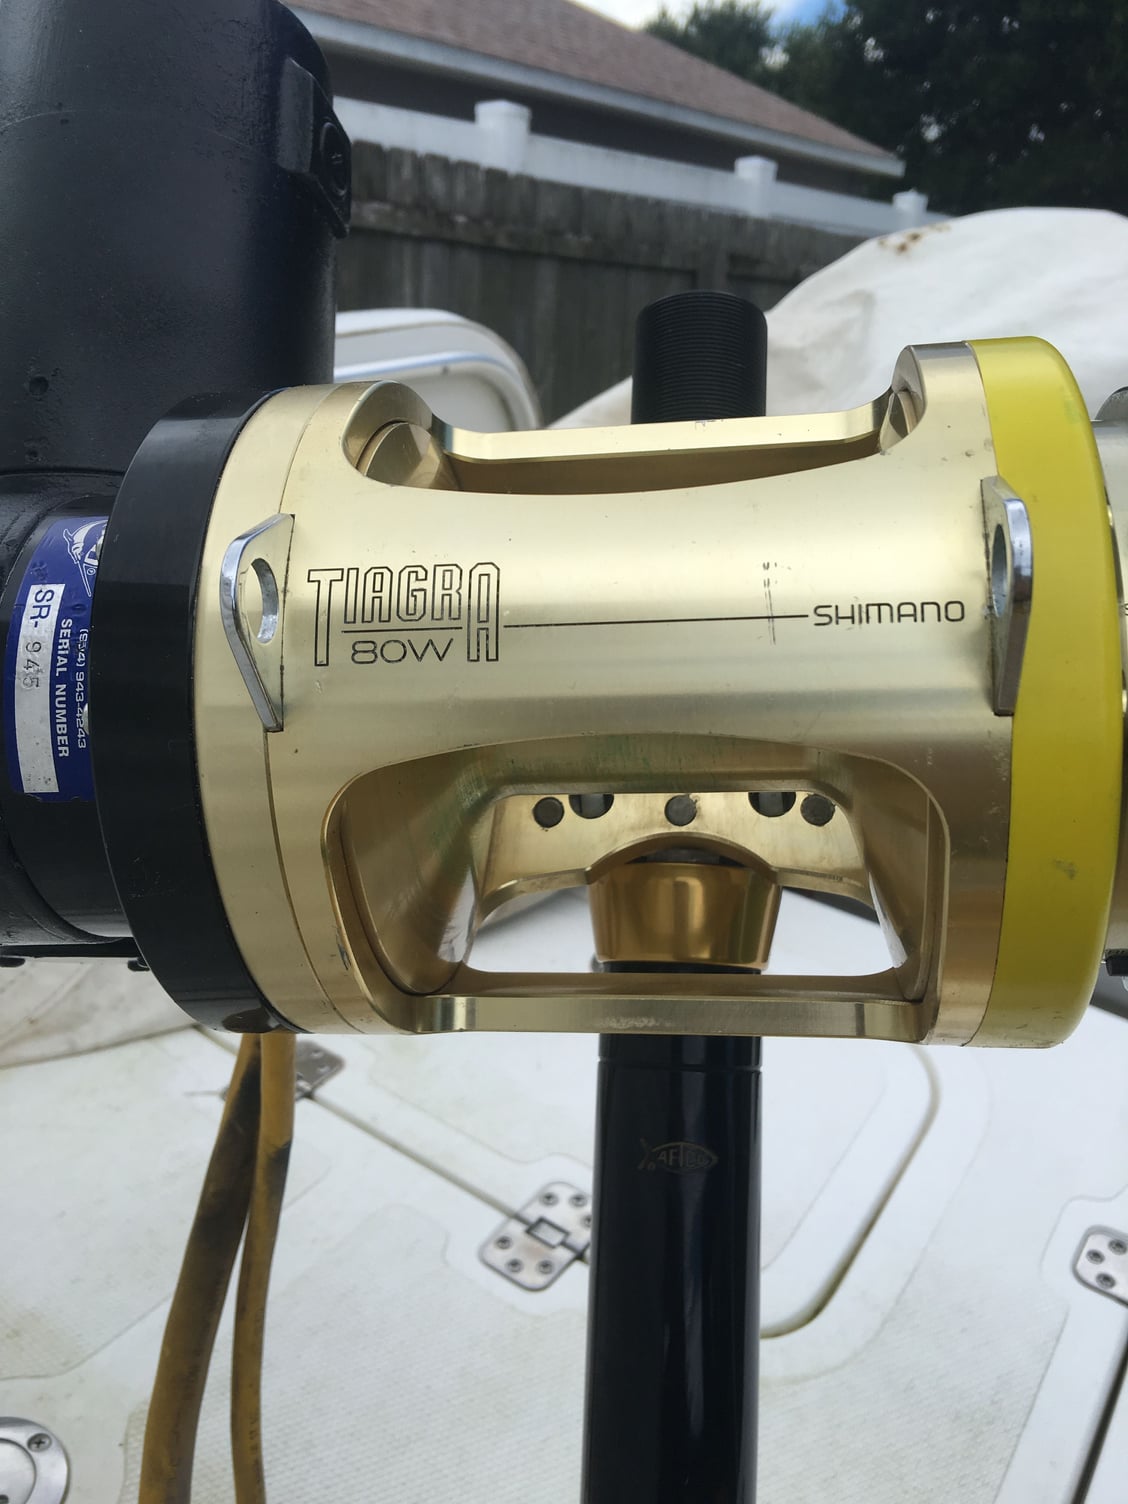 Lindgren Pitman Electric Reel on Tiagra 80w - The Hull Truth - Boating and  Fishing Forum